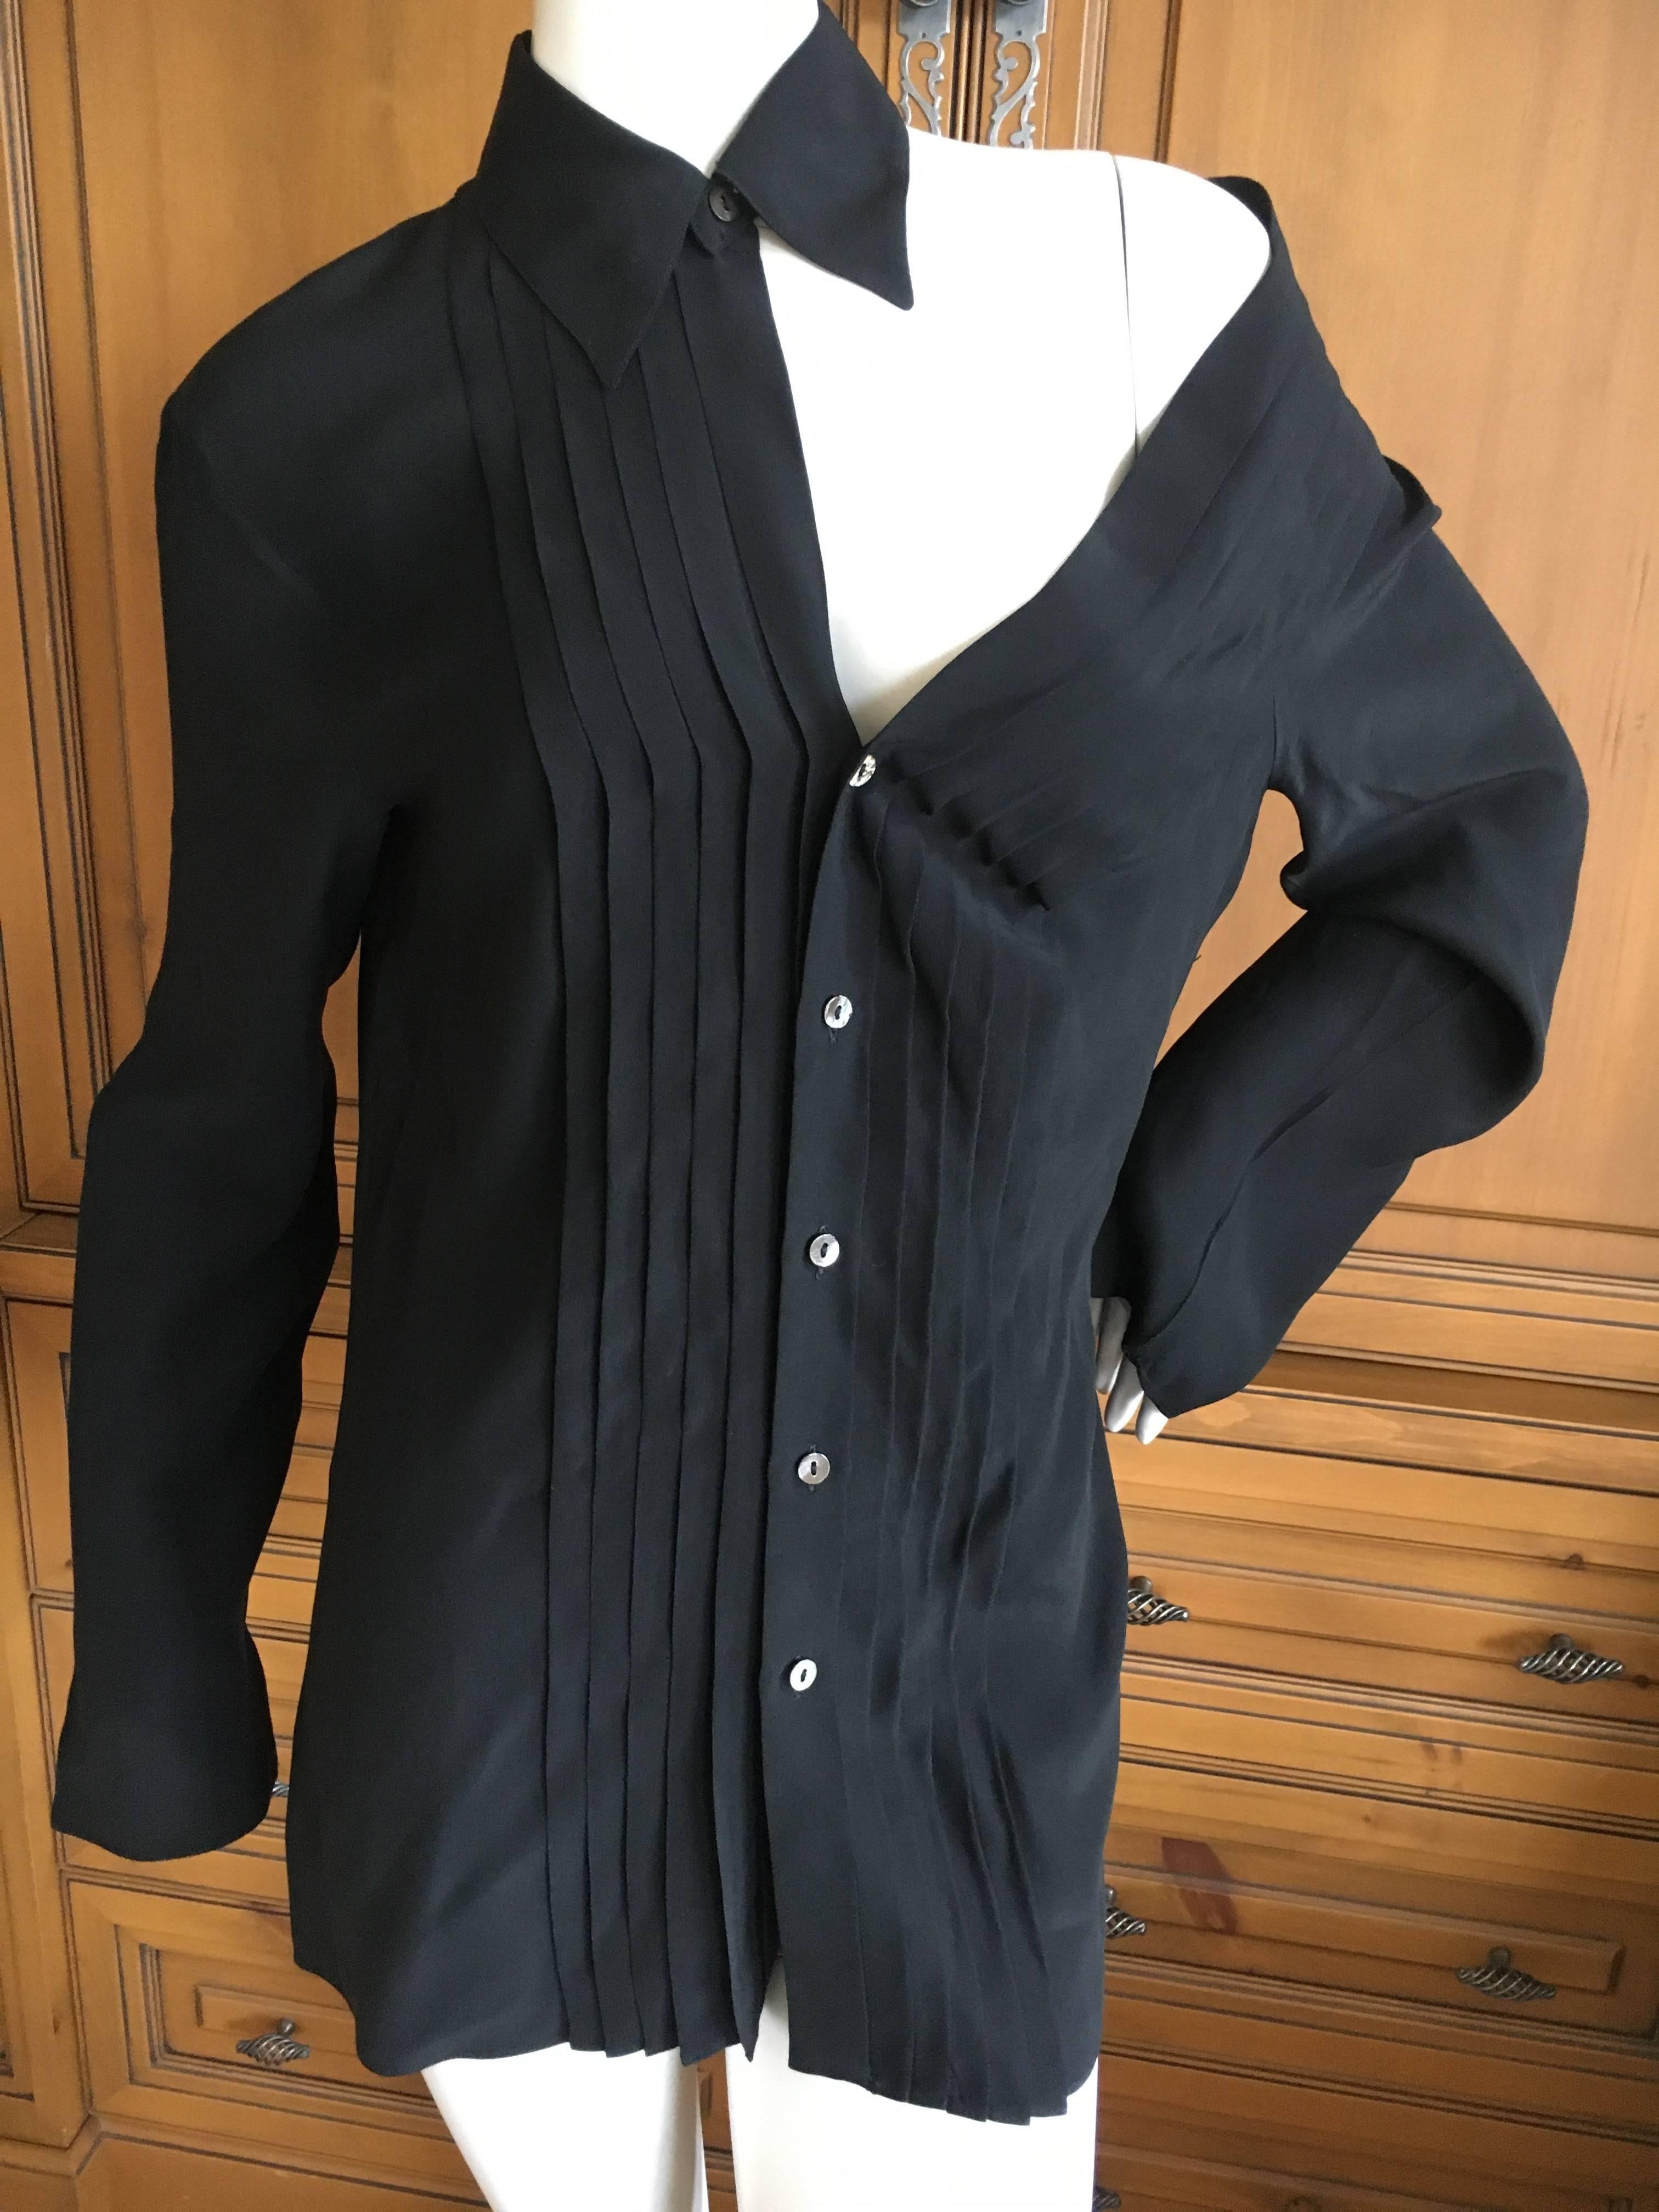 Jean Paul Gaultier Femme Black Silk Tuxedo Shirt with Cut Away Exposed Shoulder.
So Chic 
Size L